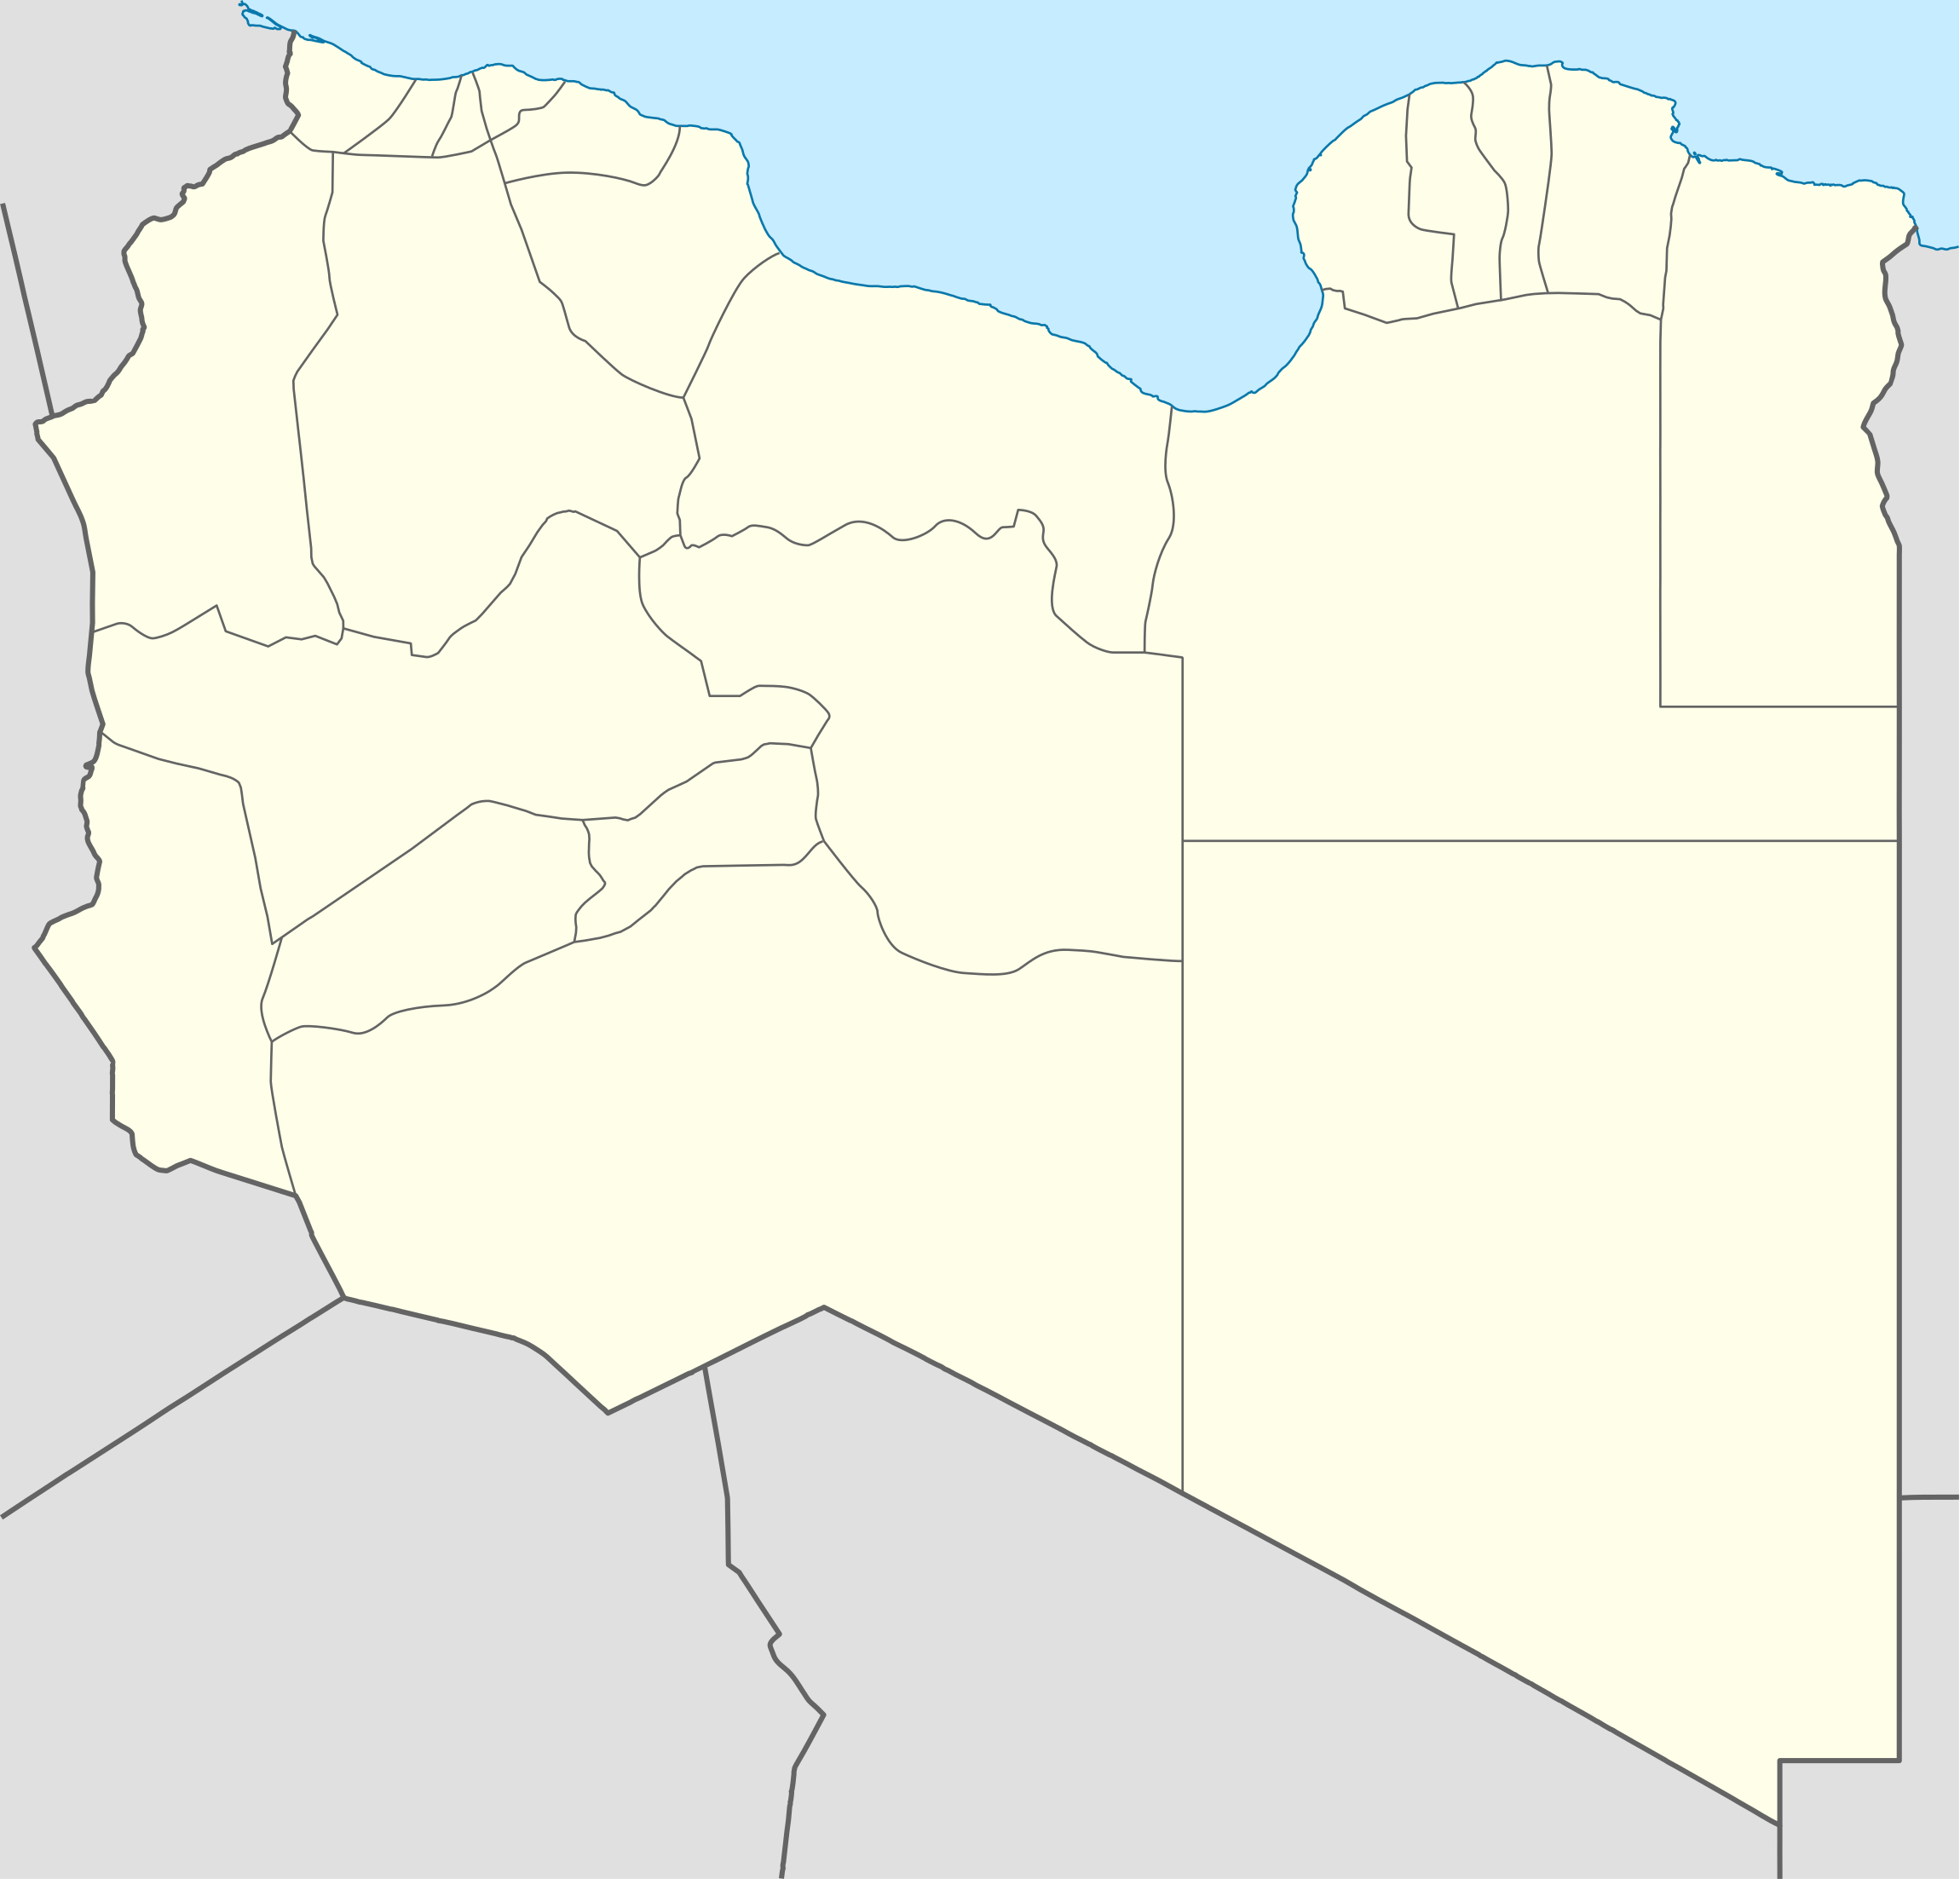 Libyan Civil War detailed map/doc is located in Libya